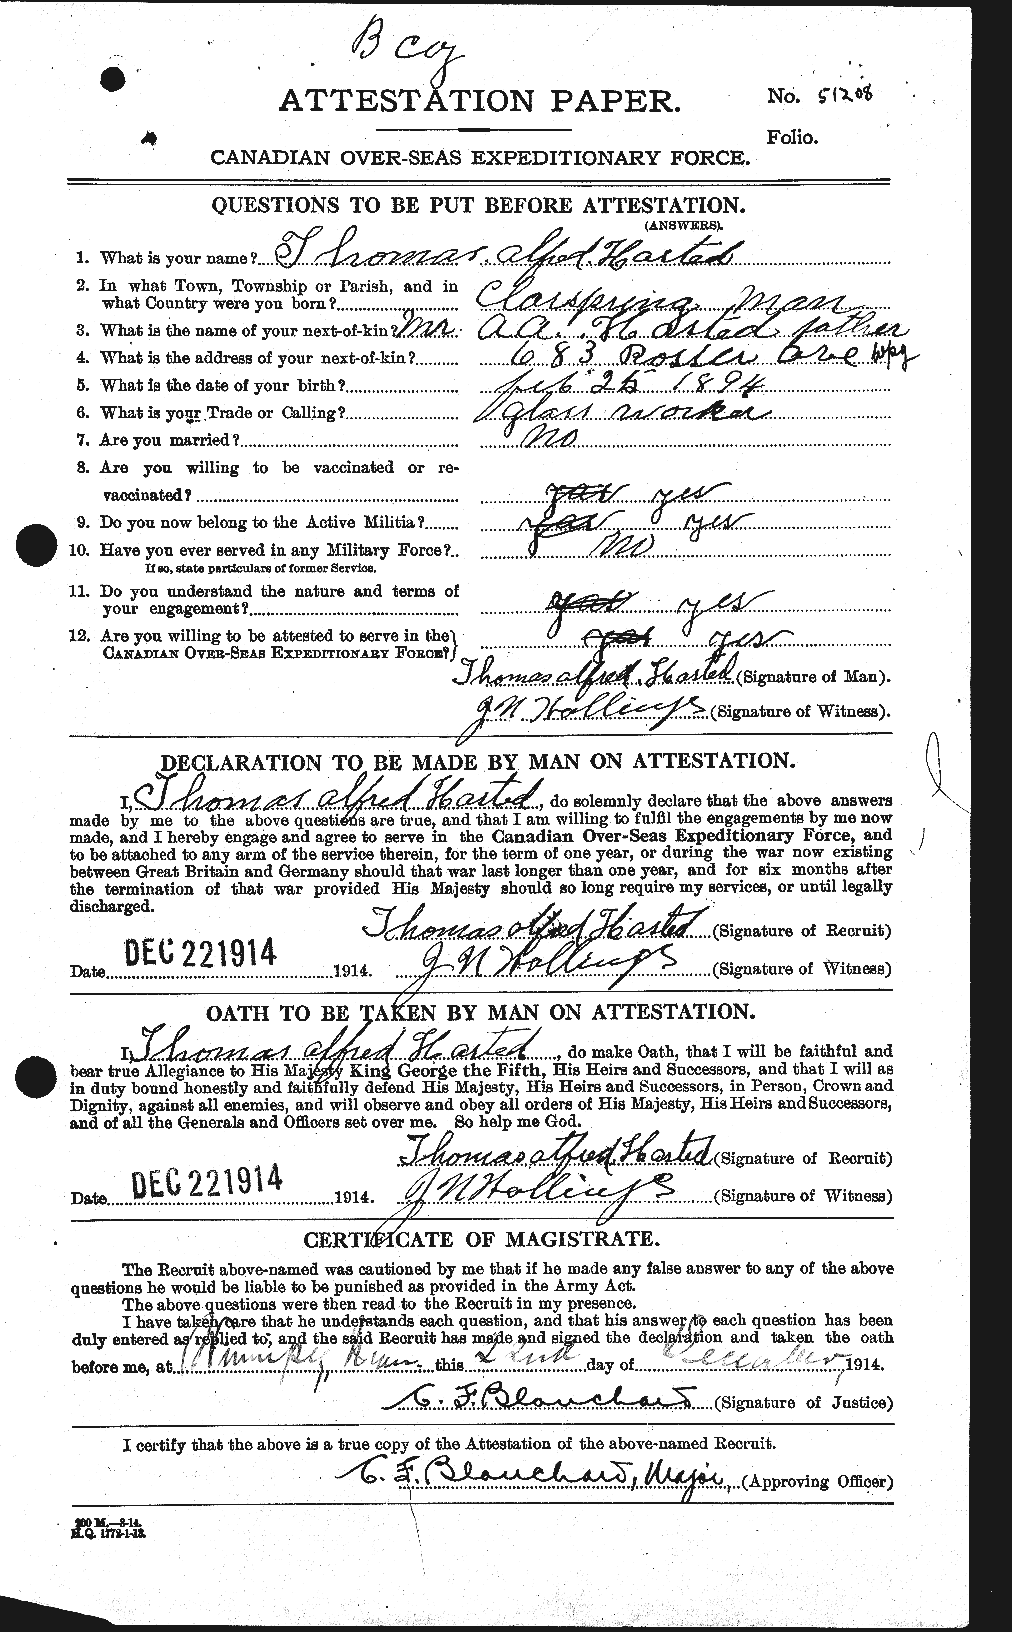 Personnel Records of the First World War - CEF 387003a